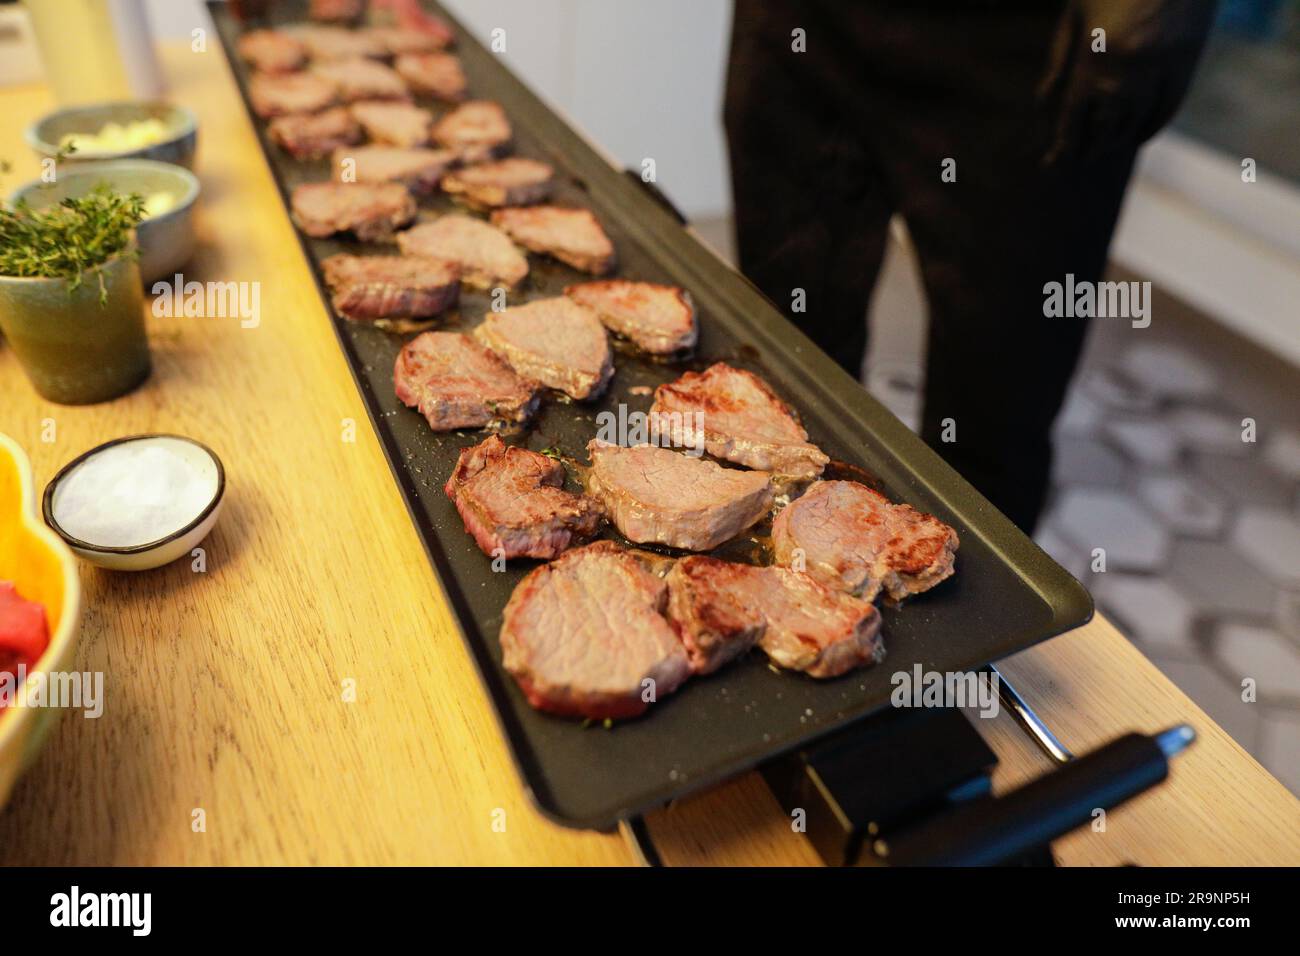 Shallow depth of field (selective focus) details with beef steak being cooked by a chef on a stove with butter, salt and rosemary. Stock Photo